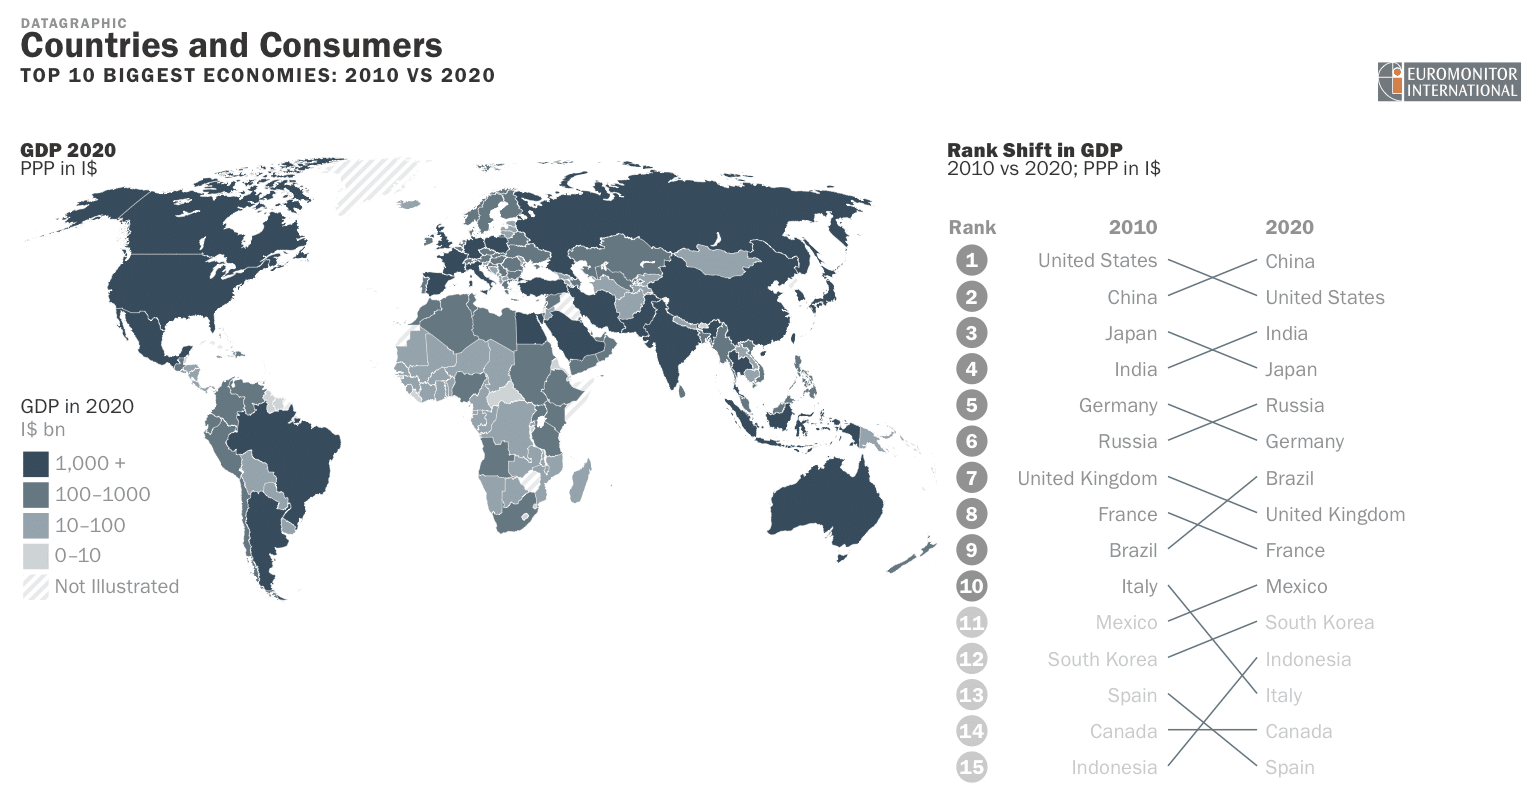 world-GDP-forecast-2020-euromonitor.png